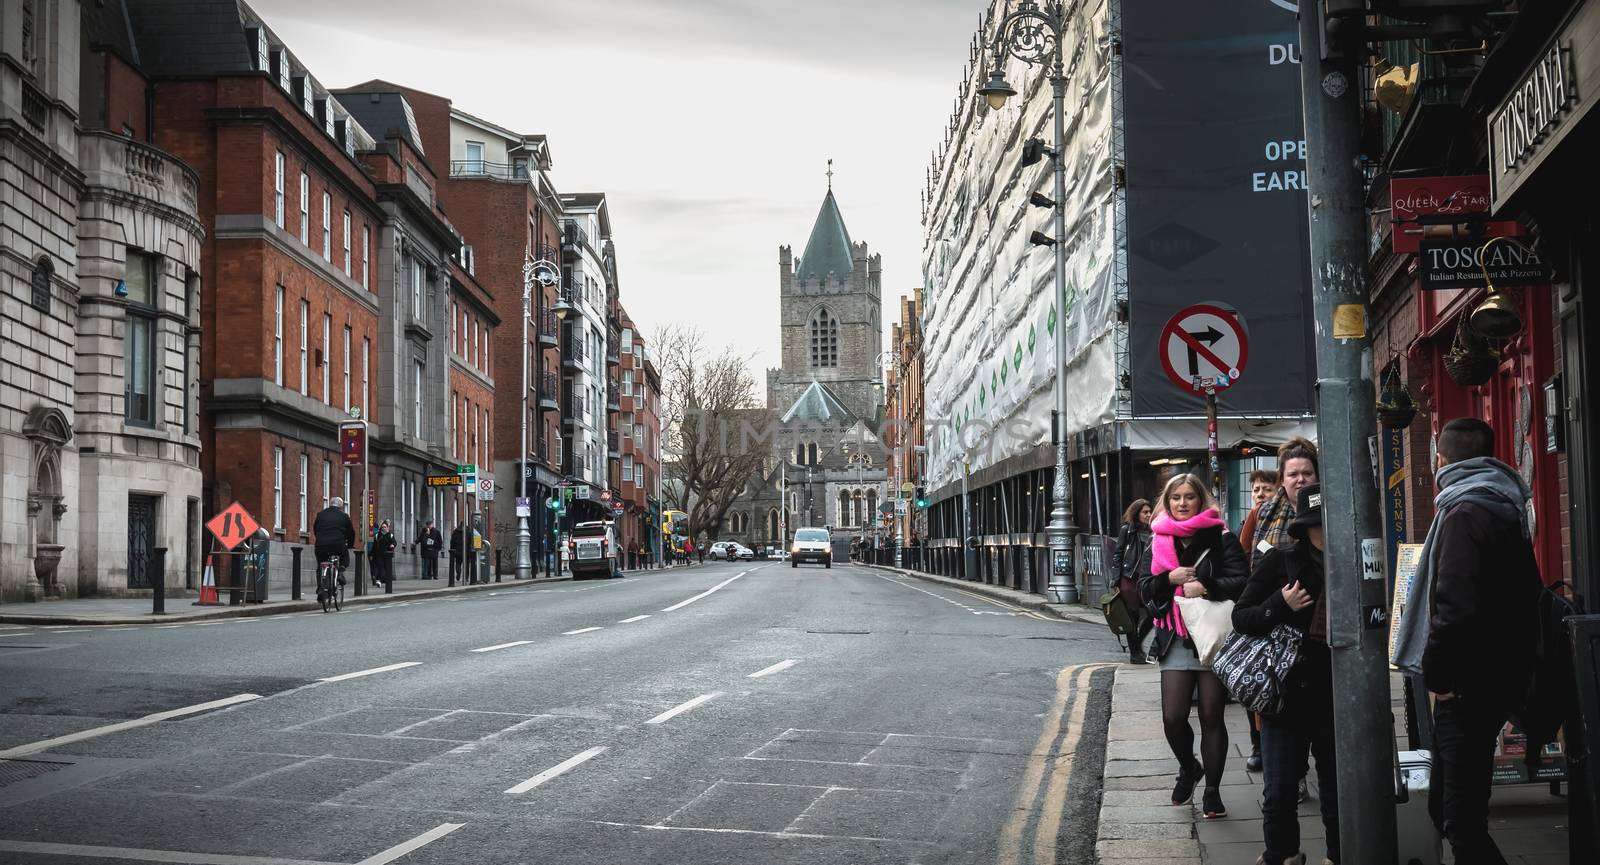 Dublin, Ireland - February 11, 2019: Architecture detail and street atmosphere in a shopping street on a winter day